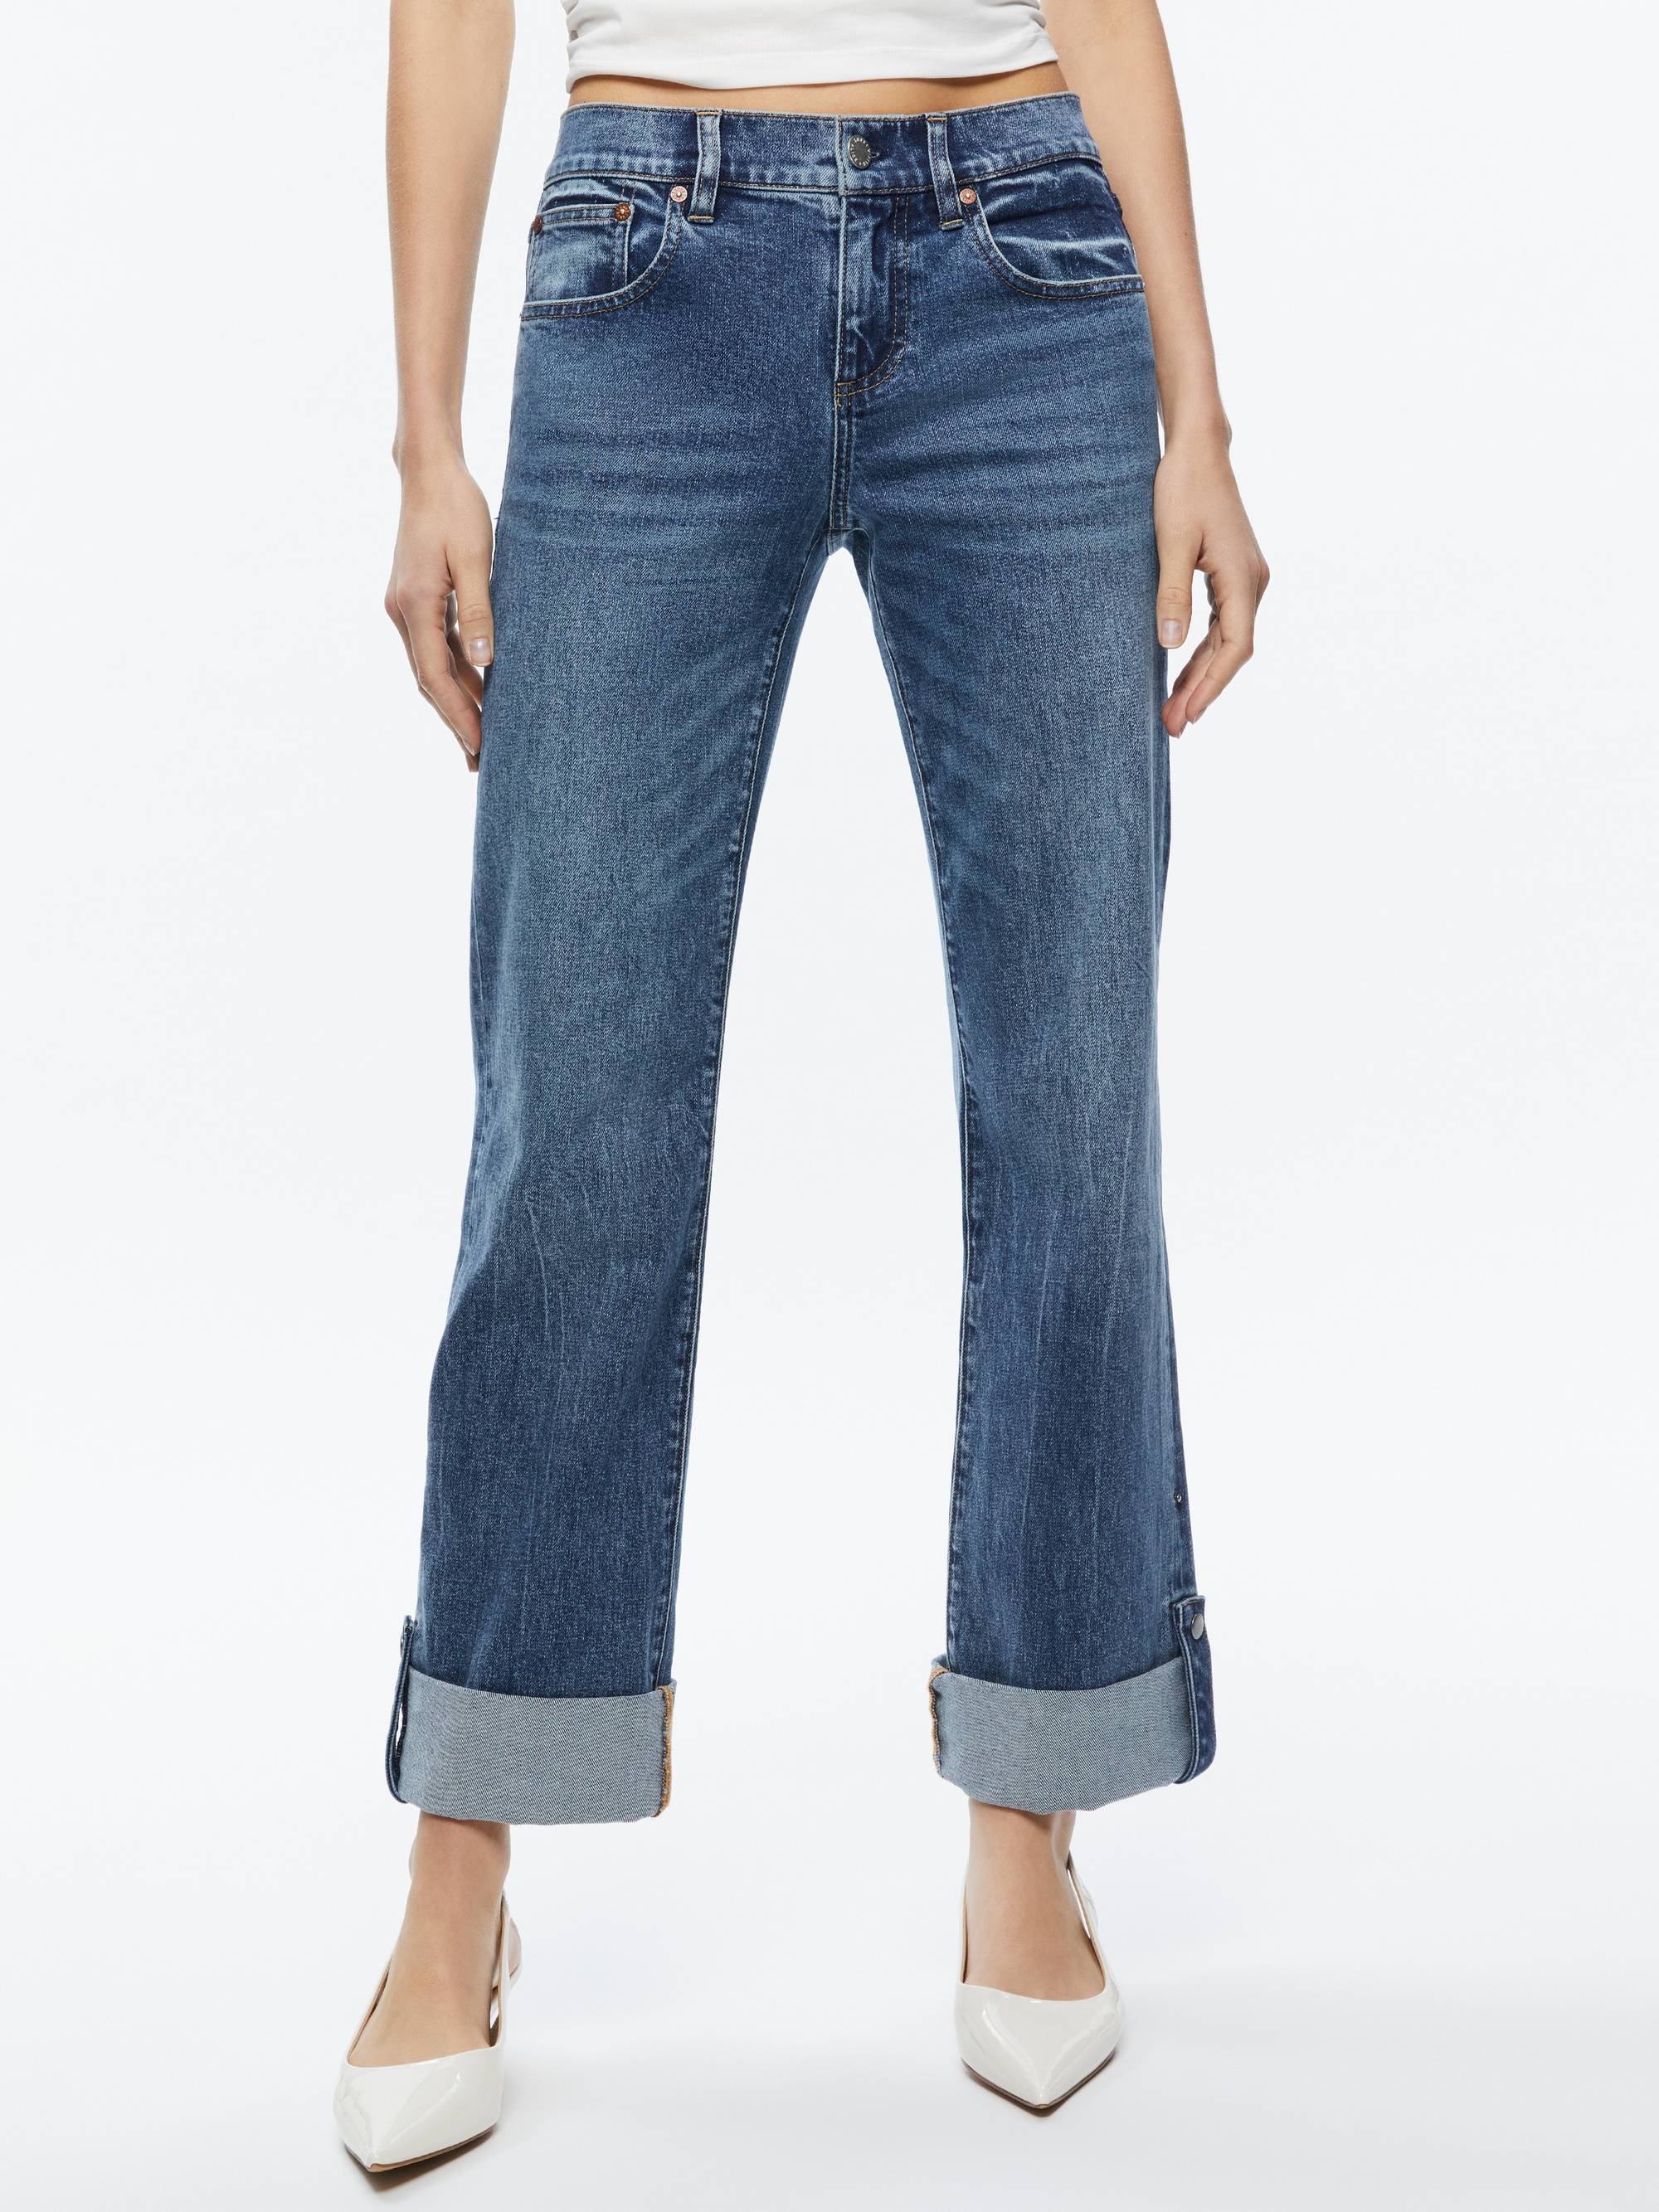 ABILENE LOW RISE CUFFED JEAN WITH SNAPS - 2